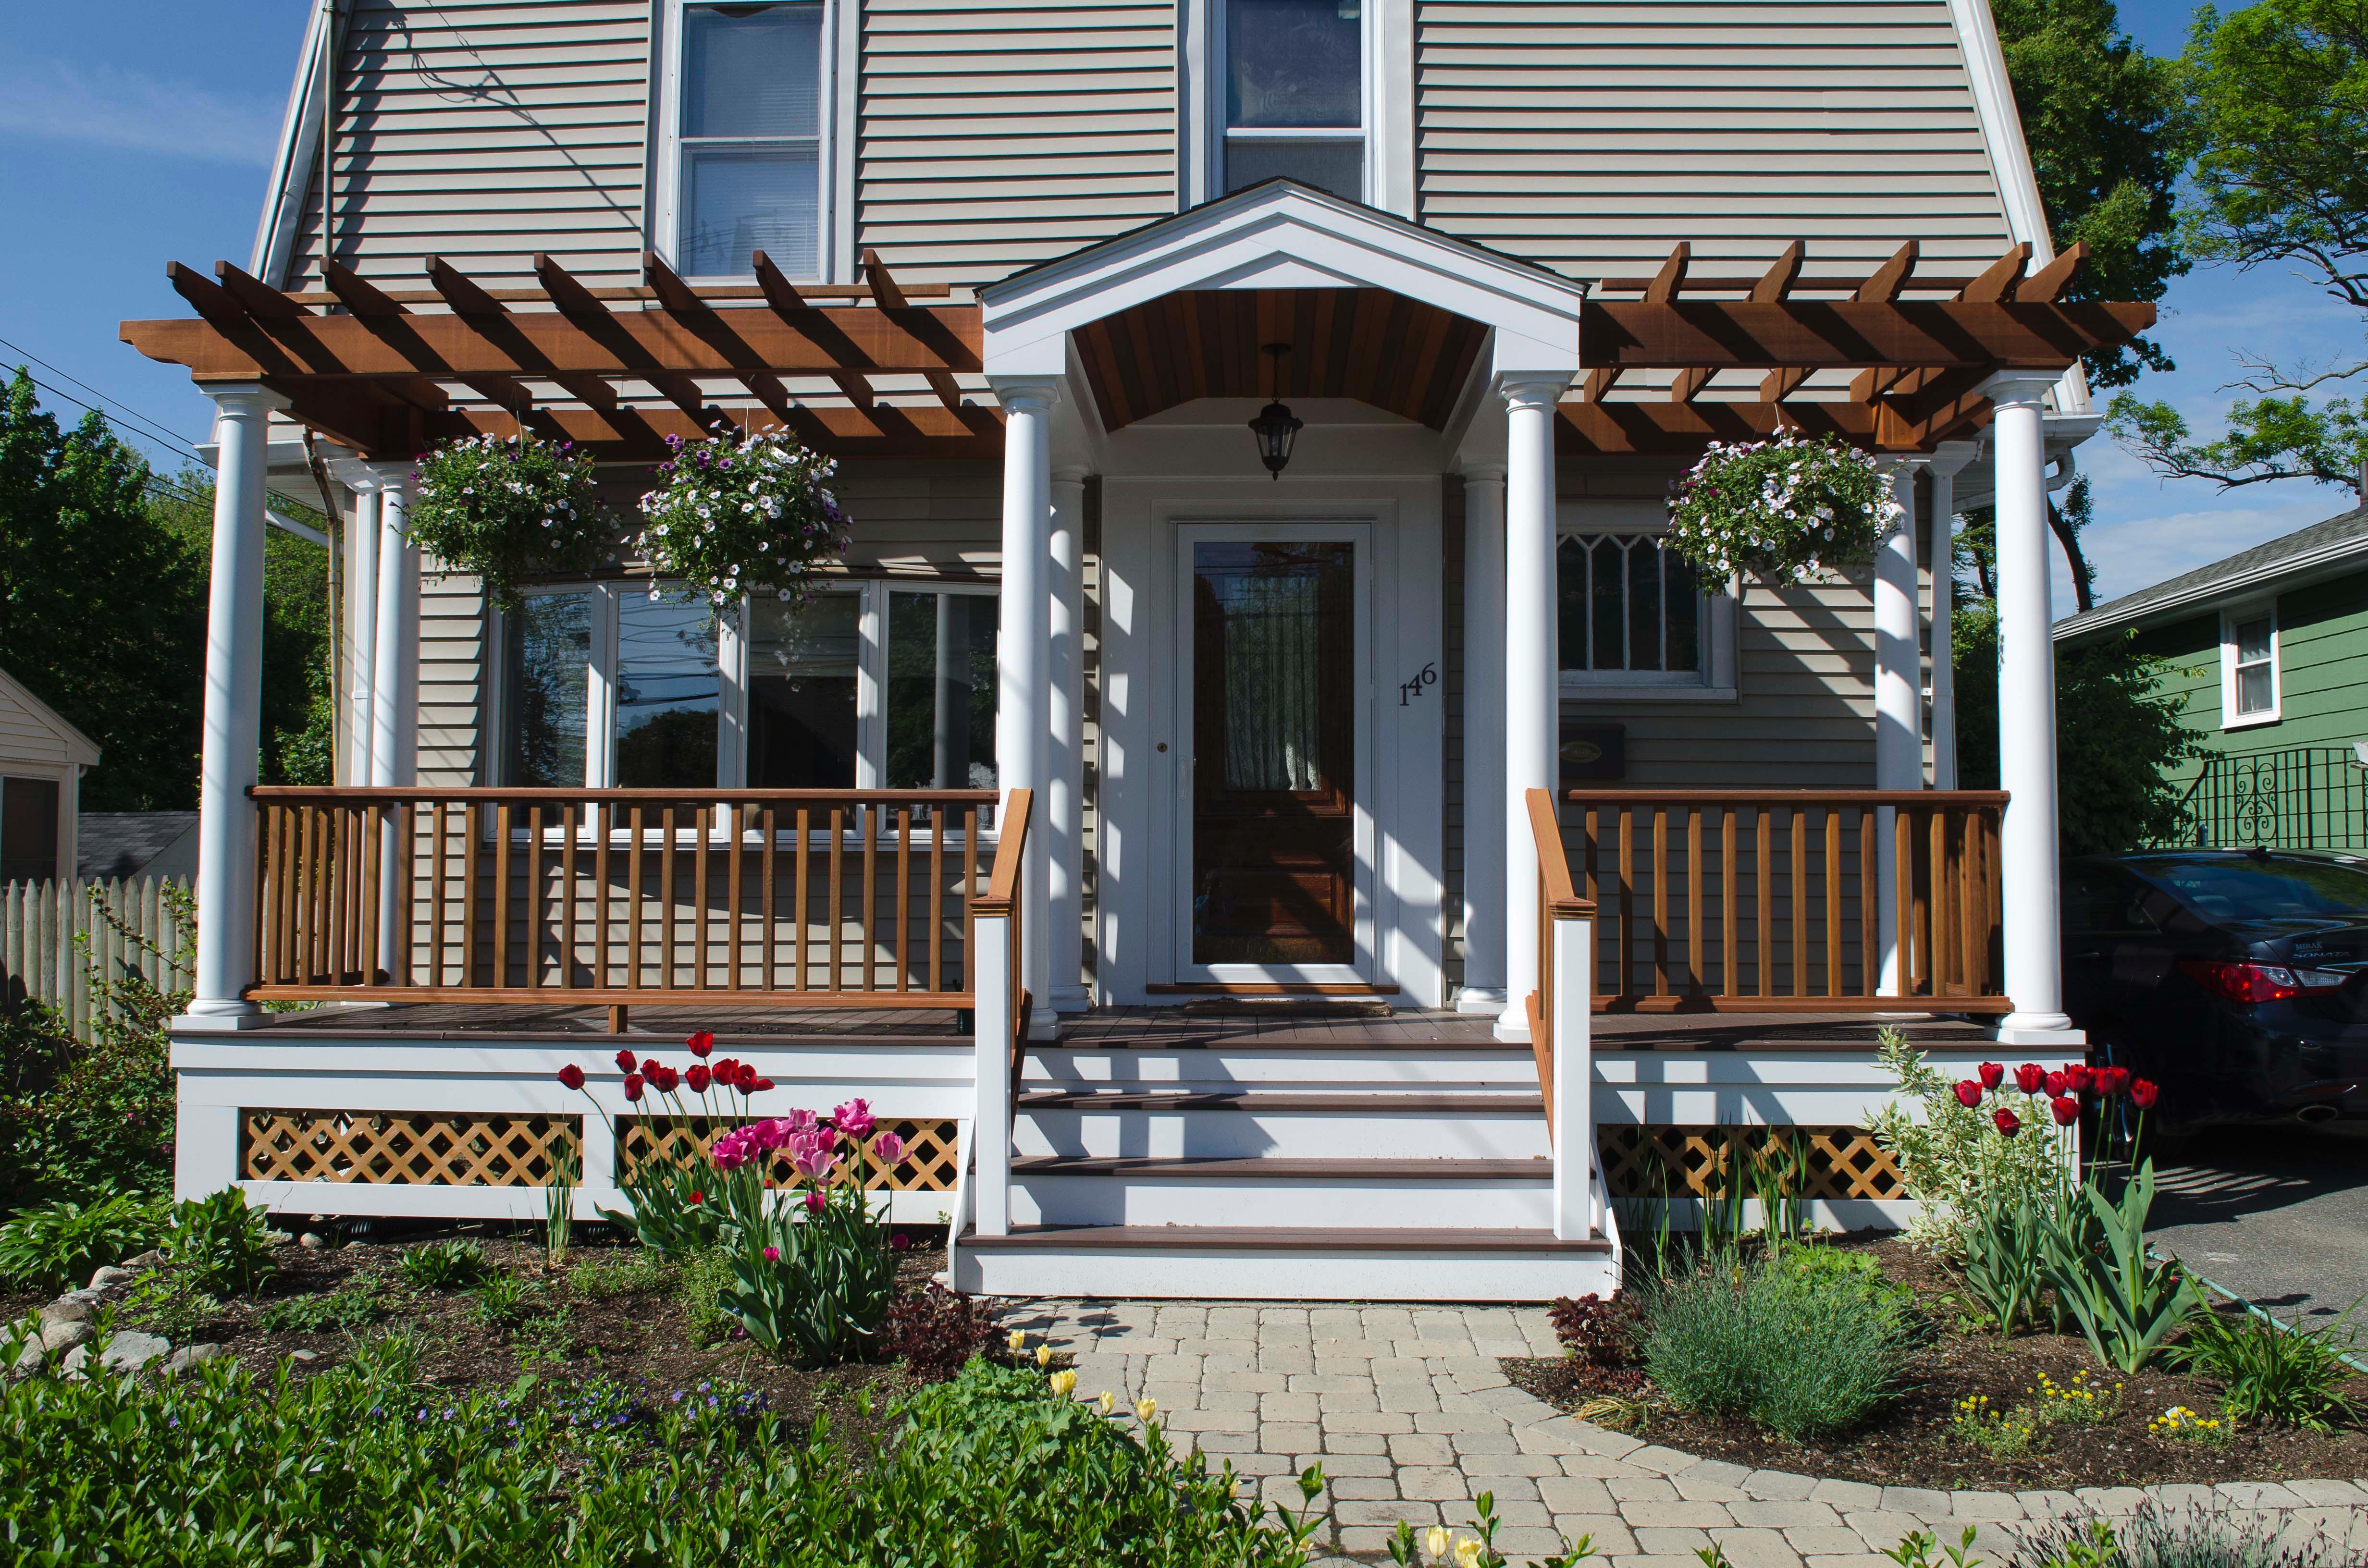 The porch, landscaping, and revised front walk create an appealing welcome.  